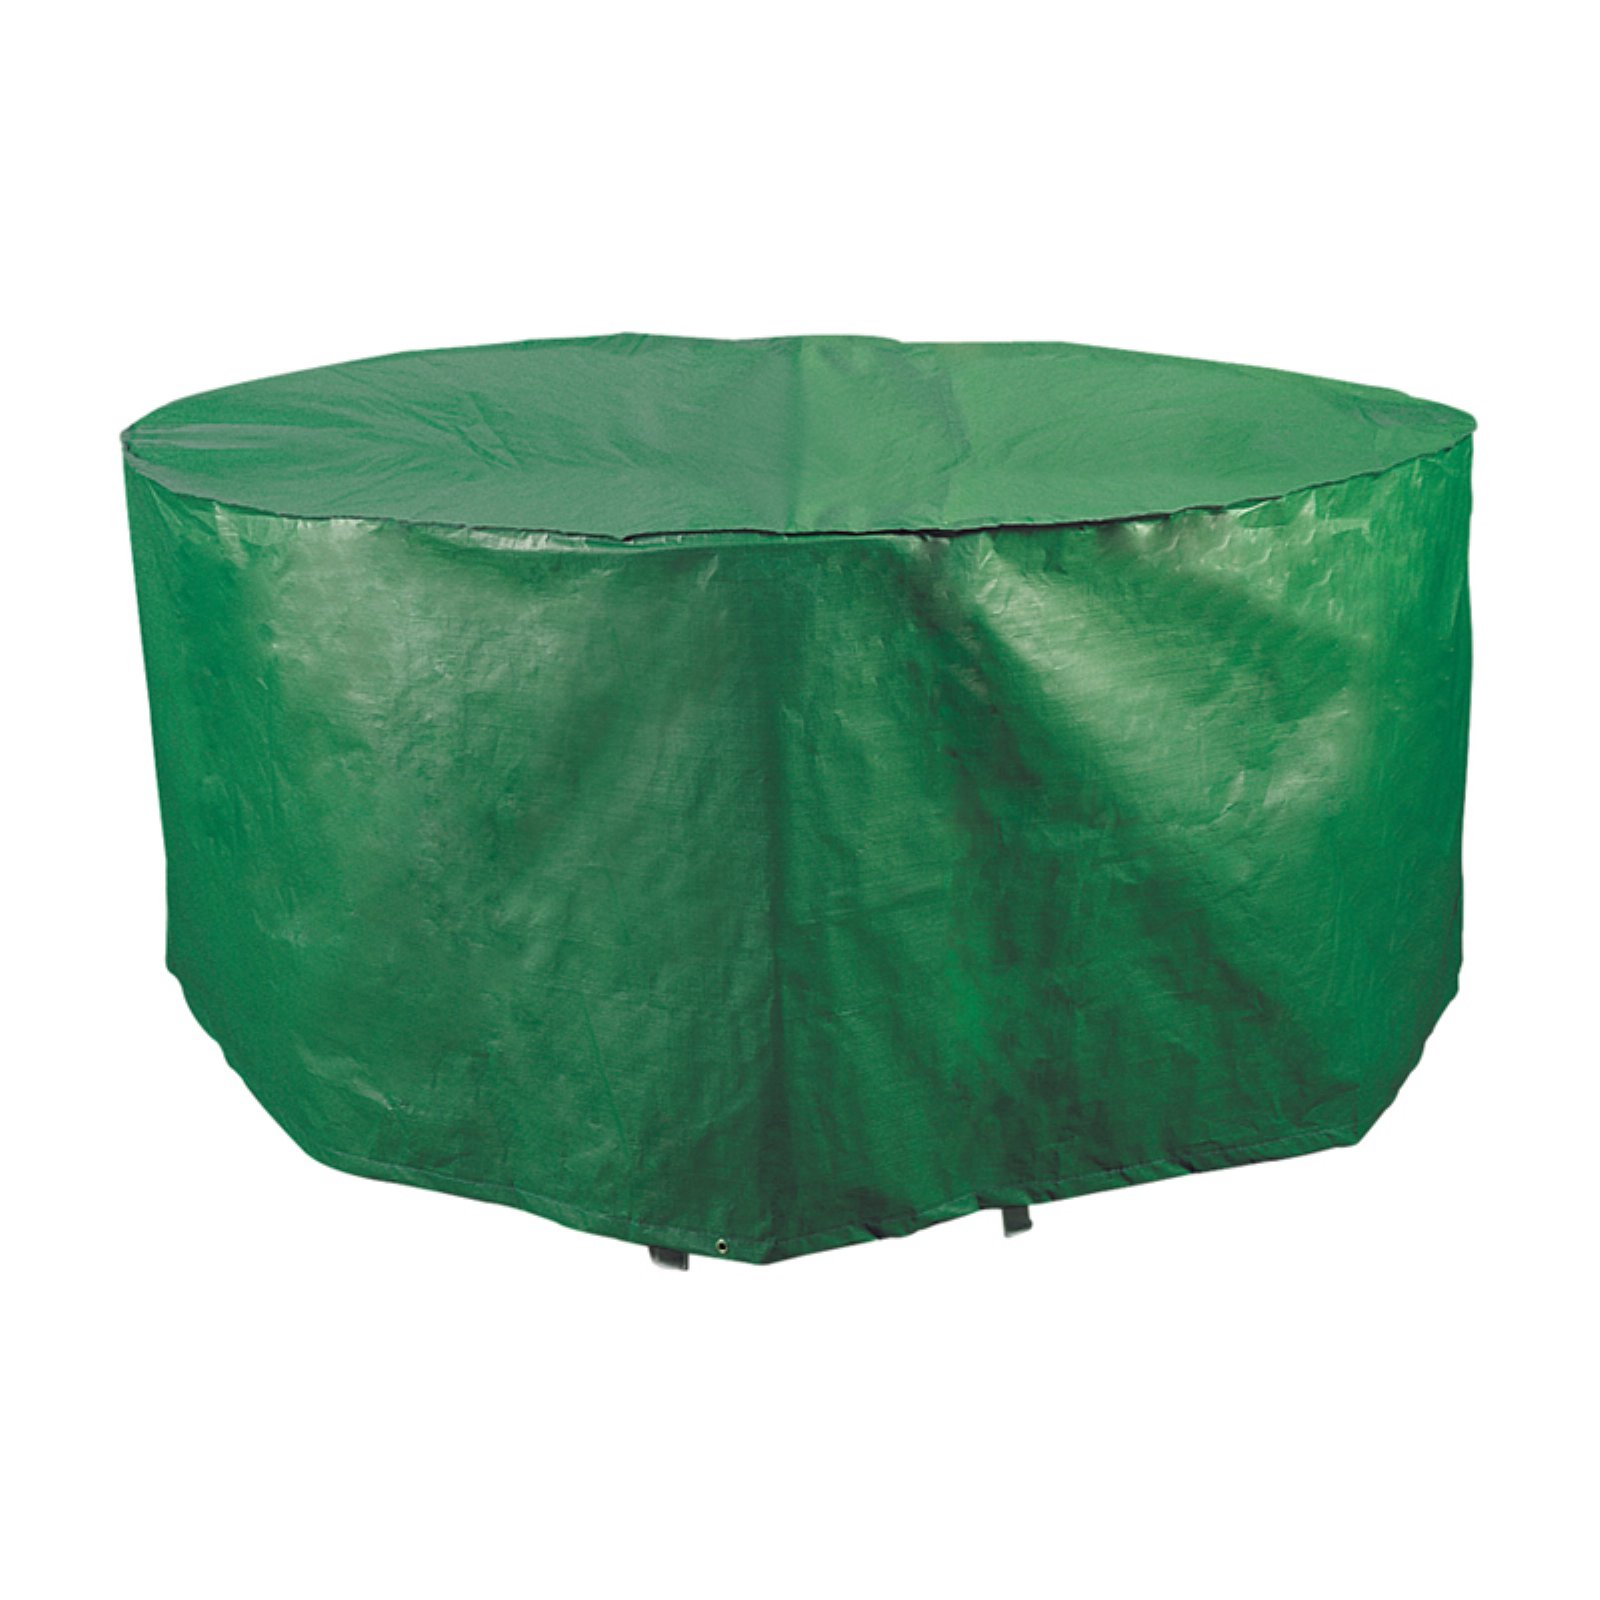 Bosmere B321 Round Patio Set Cover - 84 diam. in. - Green - image 1 of 2